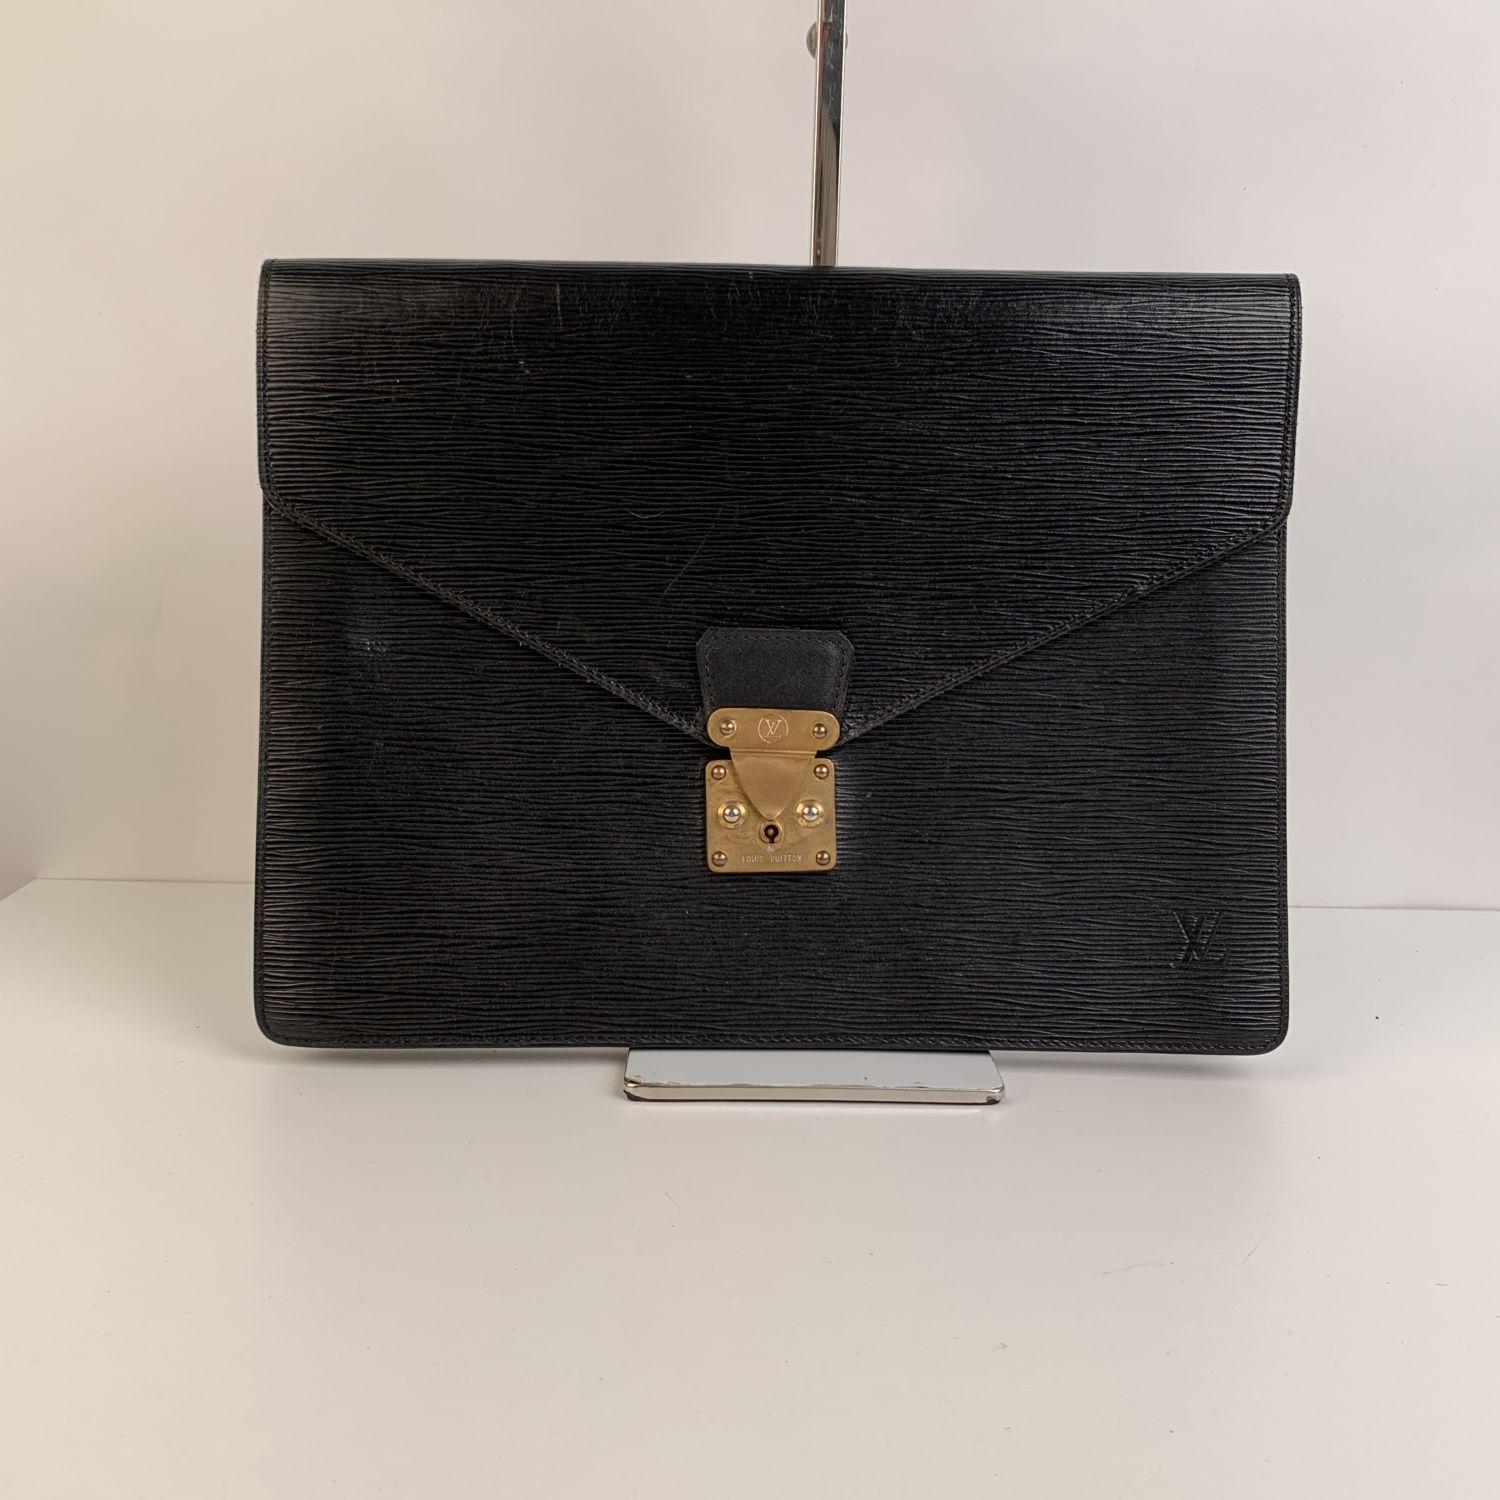 Classic Louis Vuitton black Epi leather 'Serviette Senateur'. It features flap with press lock closure on the front. 1 main compartment and leather lining. . 'LOUIS VUITTON Paris' adn 'made in France' engraved inside




Details

MATERIAL: